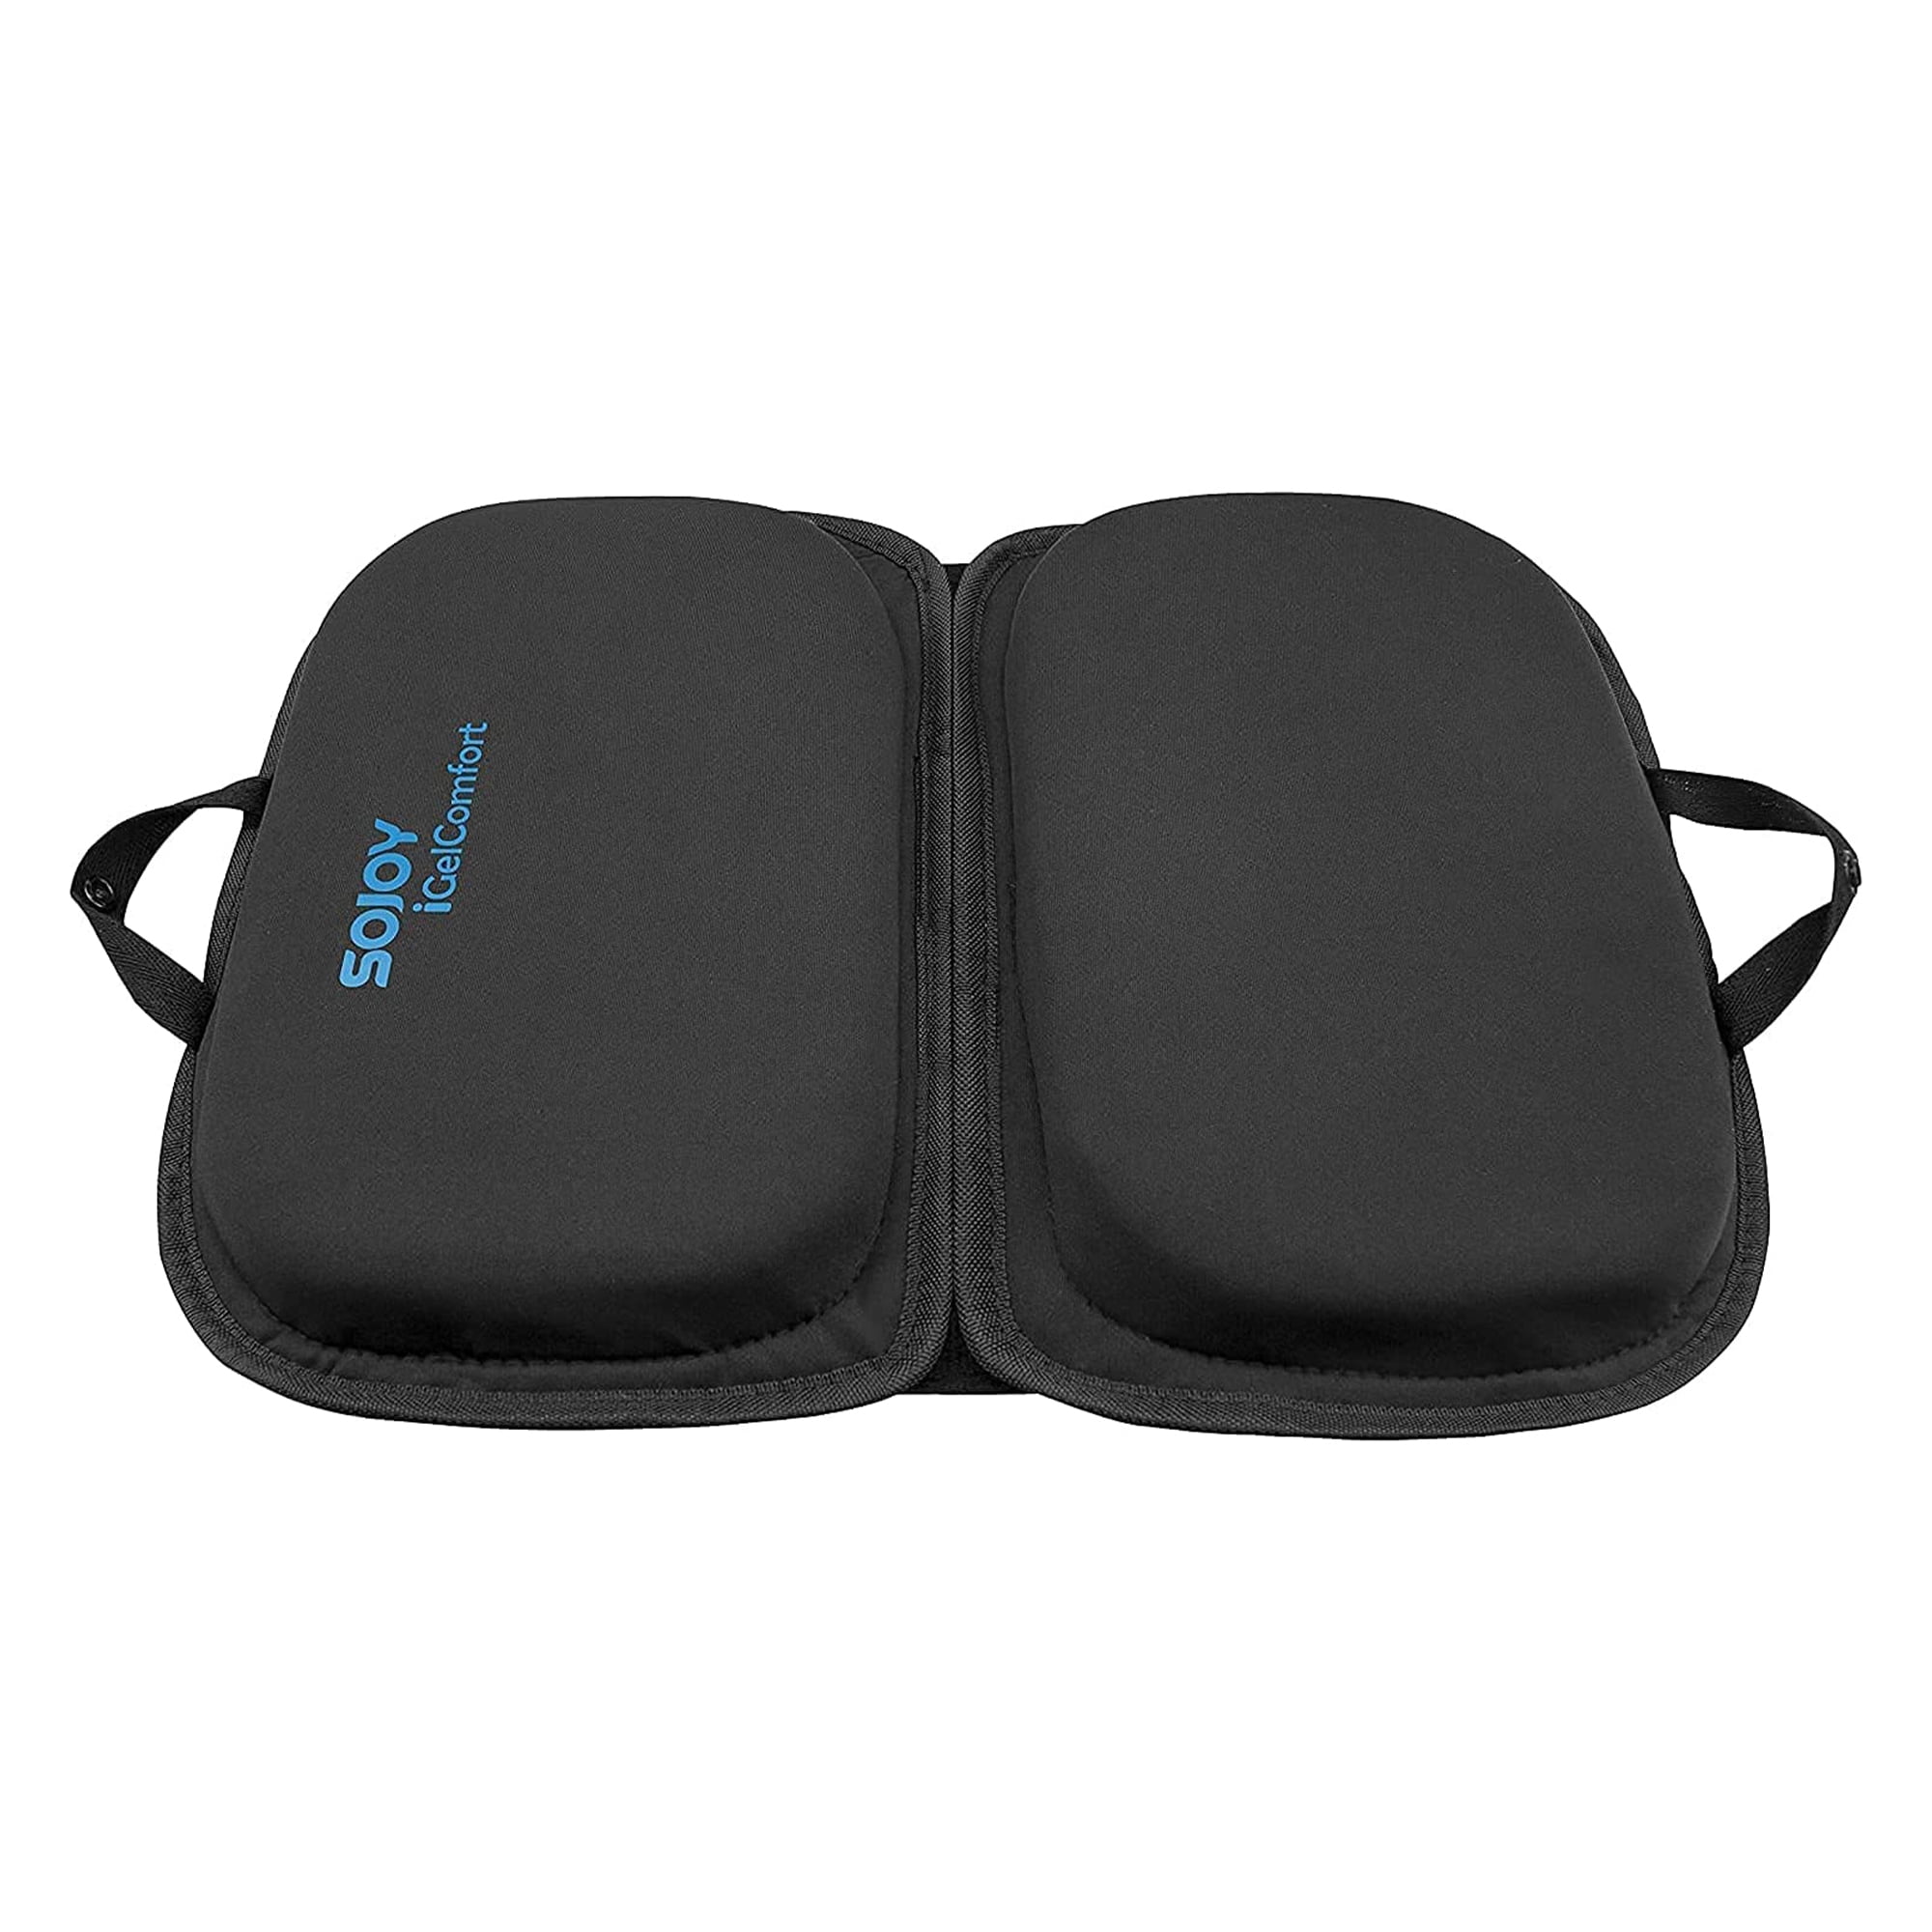 Sojoy 3 in 1 Travel Blanket for Plane&Train Comfort-Warm Wearable  Blanket-Portable Travel Pillow or Lumbar Support Cushion - Online Shopping  for Car Heated Blankets,Heated Seat Cushion,Car Gel Cushions,Free Shipping  From USA